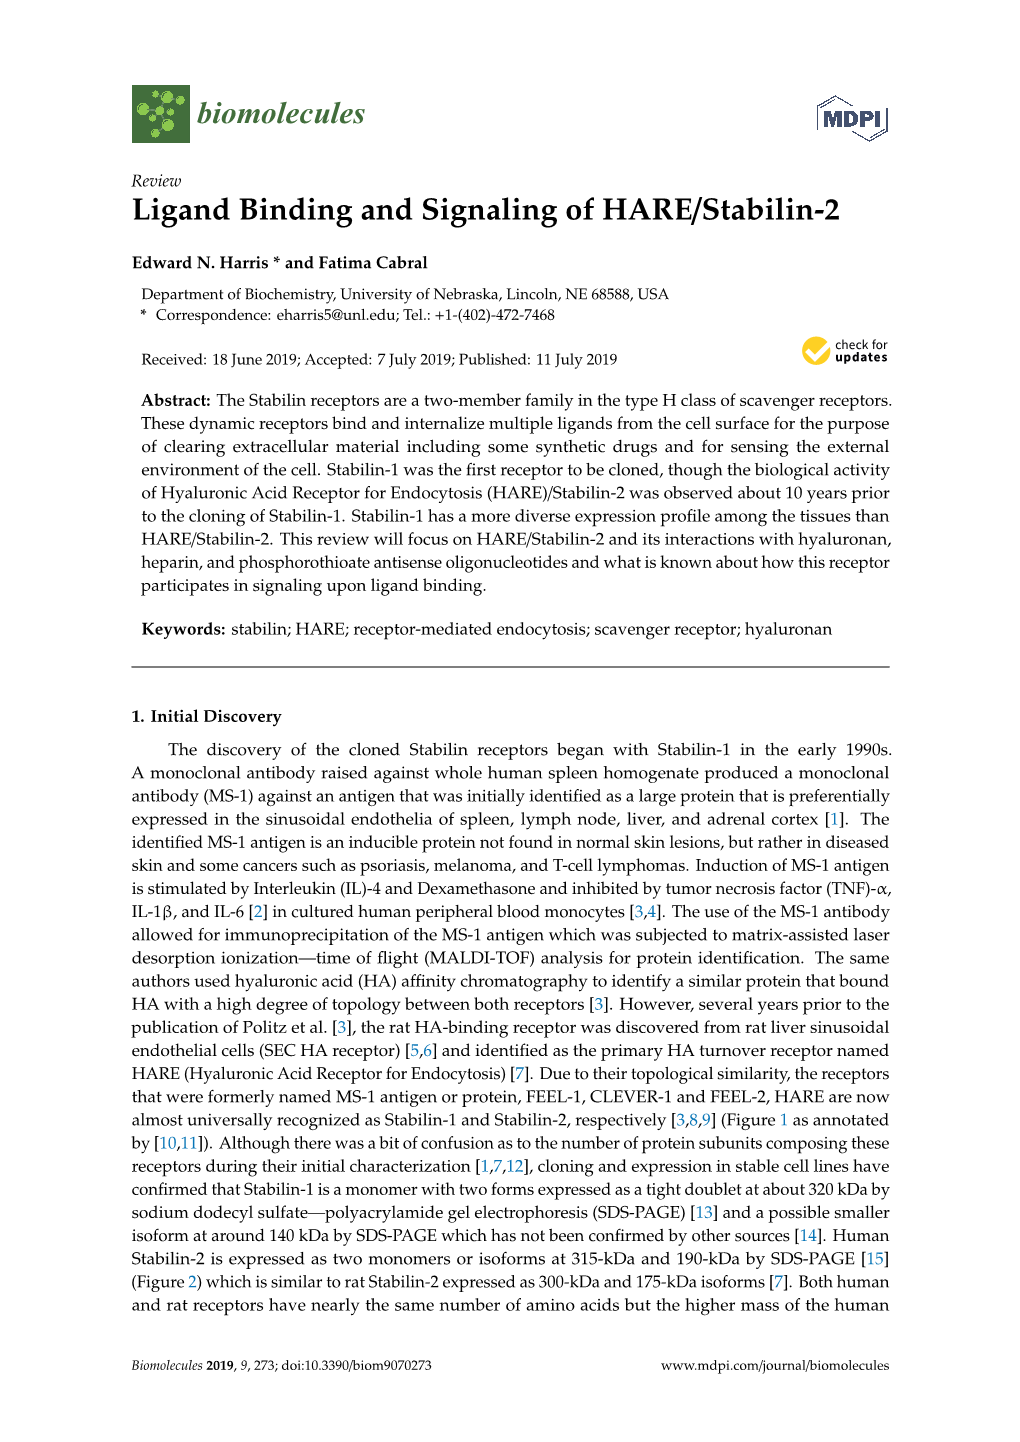 Ligand Binding and Signaling of HARE/Stabilin-2